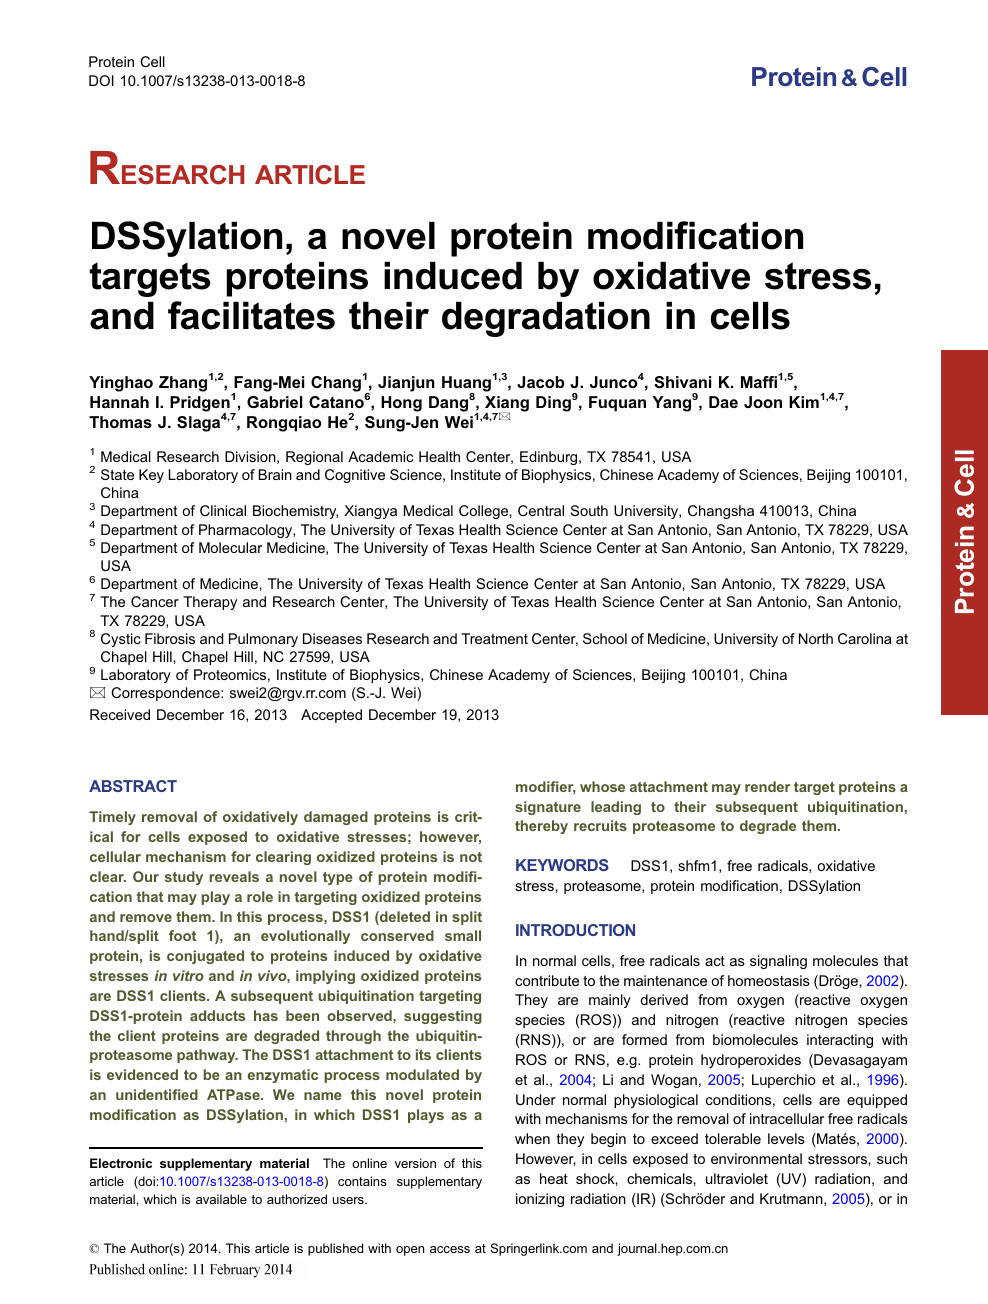 Dssylation A Novel Protein Modification Targets Proteins Induced By Oxidative Stress And Facilitates Their Degradation In Cells Topic Of Research Paper In Biological Sciences Download Scholarly Article Pdf And Read For